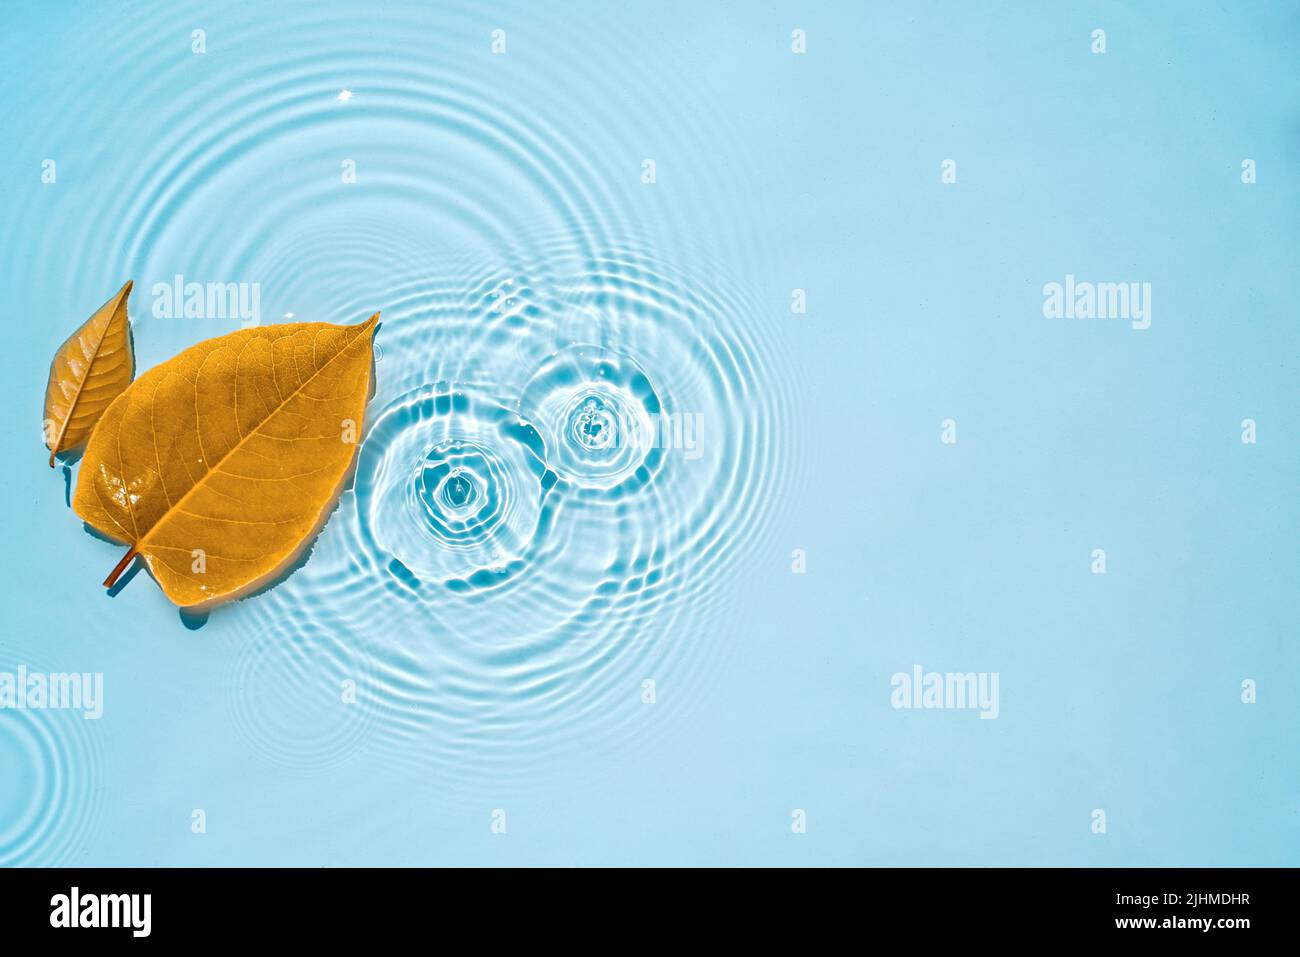 Yellow leaves on blue water with circles and ripples from drops, splashes Stock Photo